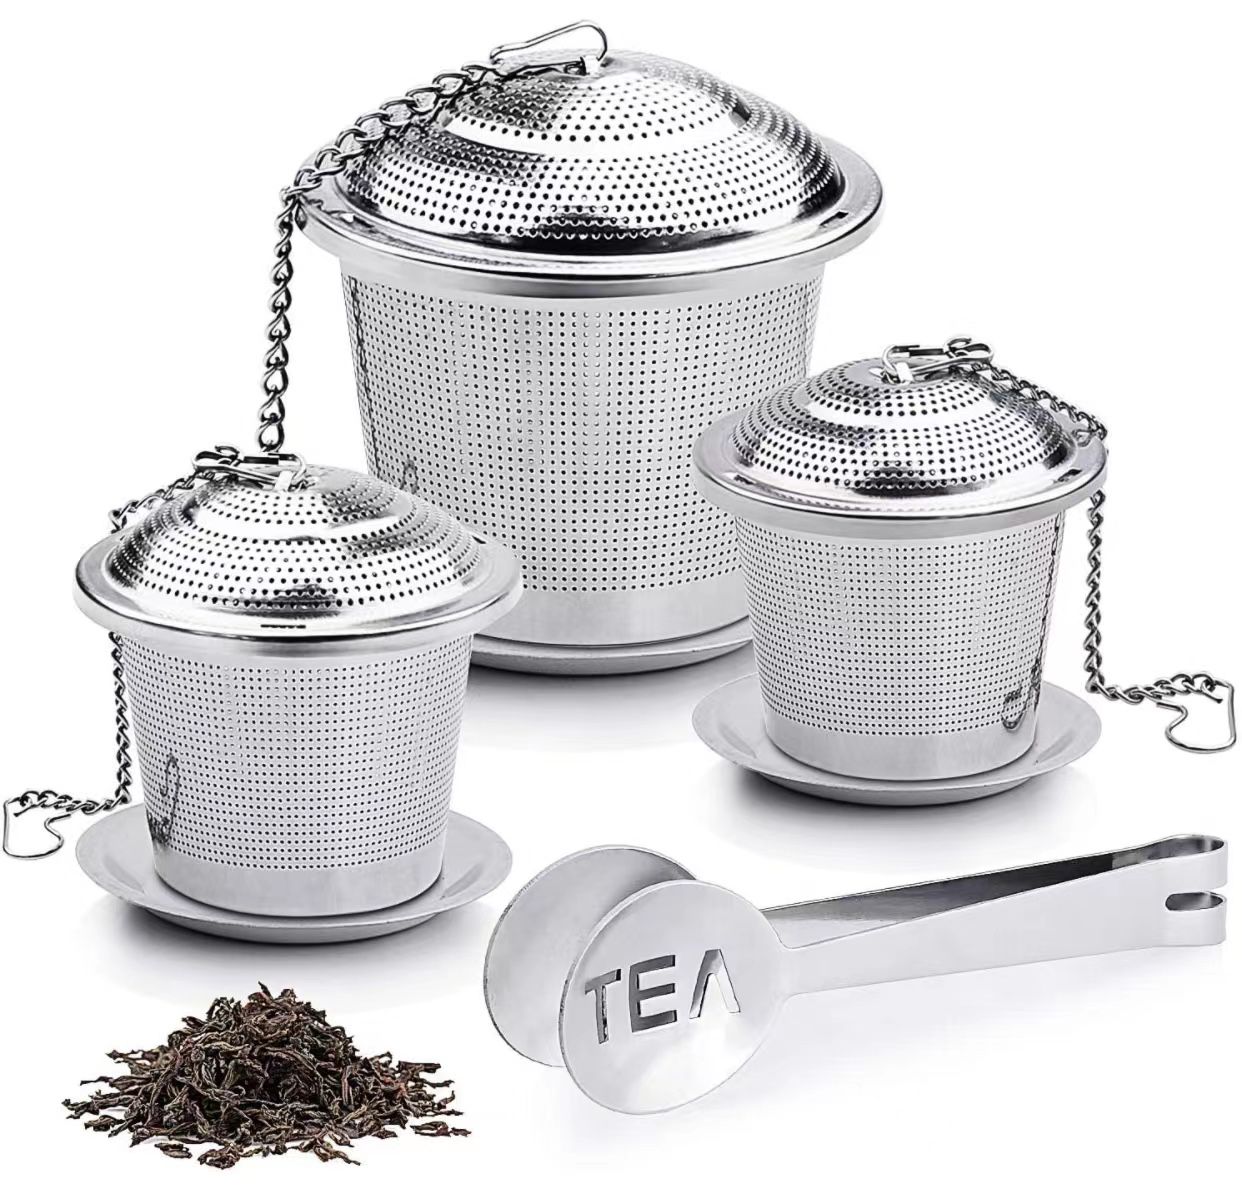 Tea Infuser, 3 Premium Stainless Steel Tea Ball Strainers & Cooking Infuser, 2 Size with Fine Mesh, Drip Trays, Extended Chain Hook to Brew Loose Leaf